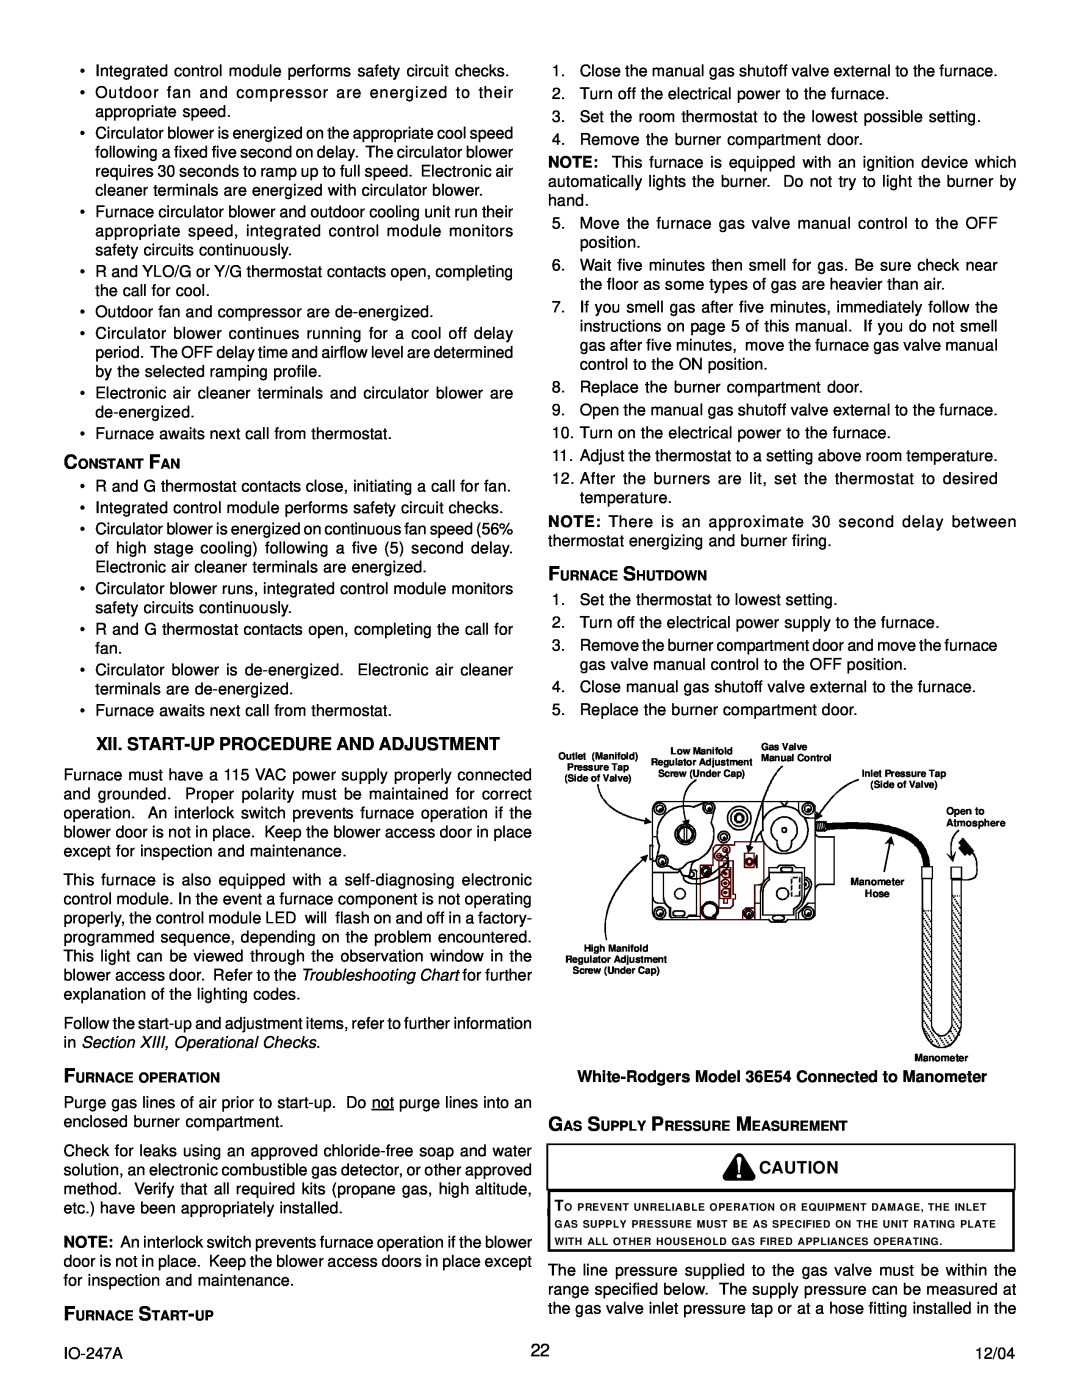 Goodman Mfg AMV8 Xii. Start-Up Procedure And Adjustment, White-Rodgers Model 36E54 Connected to Manometer 